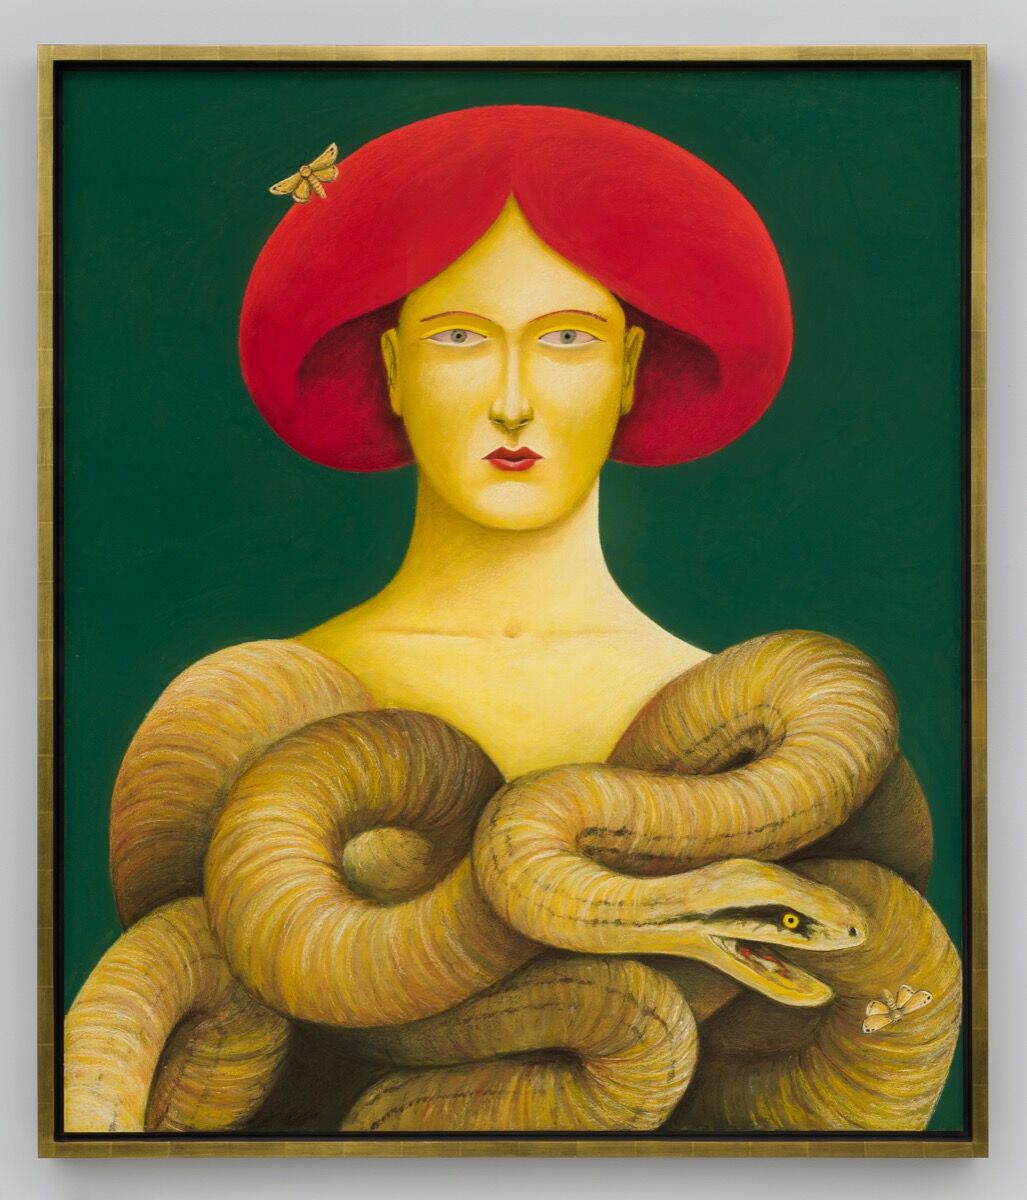 Nicolas Party, Portrait with Snakes, 2019. © Nicolas Party. Photo by Jeff McClane. Courtesy of the artist and Hauser &amp; Wirth.